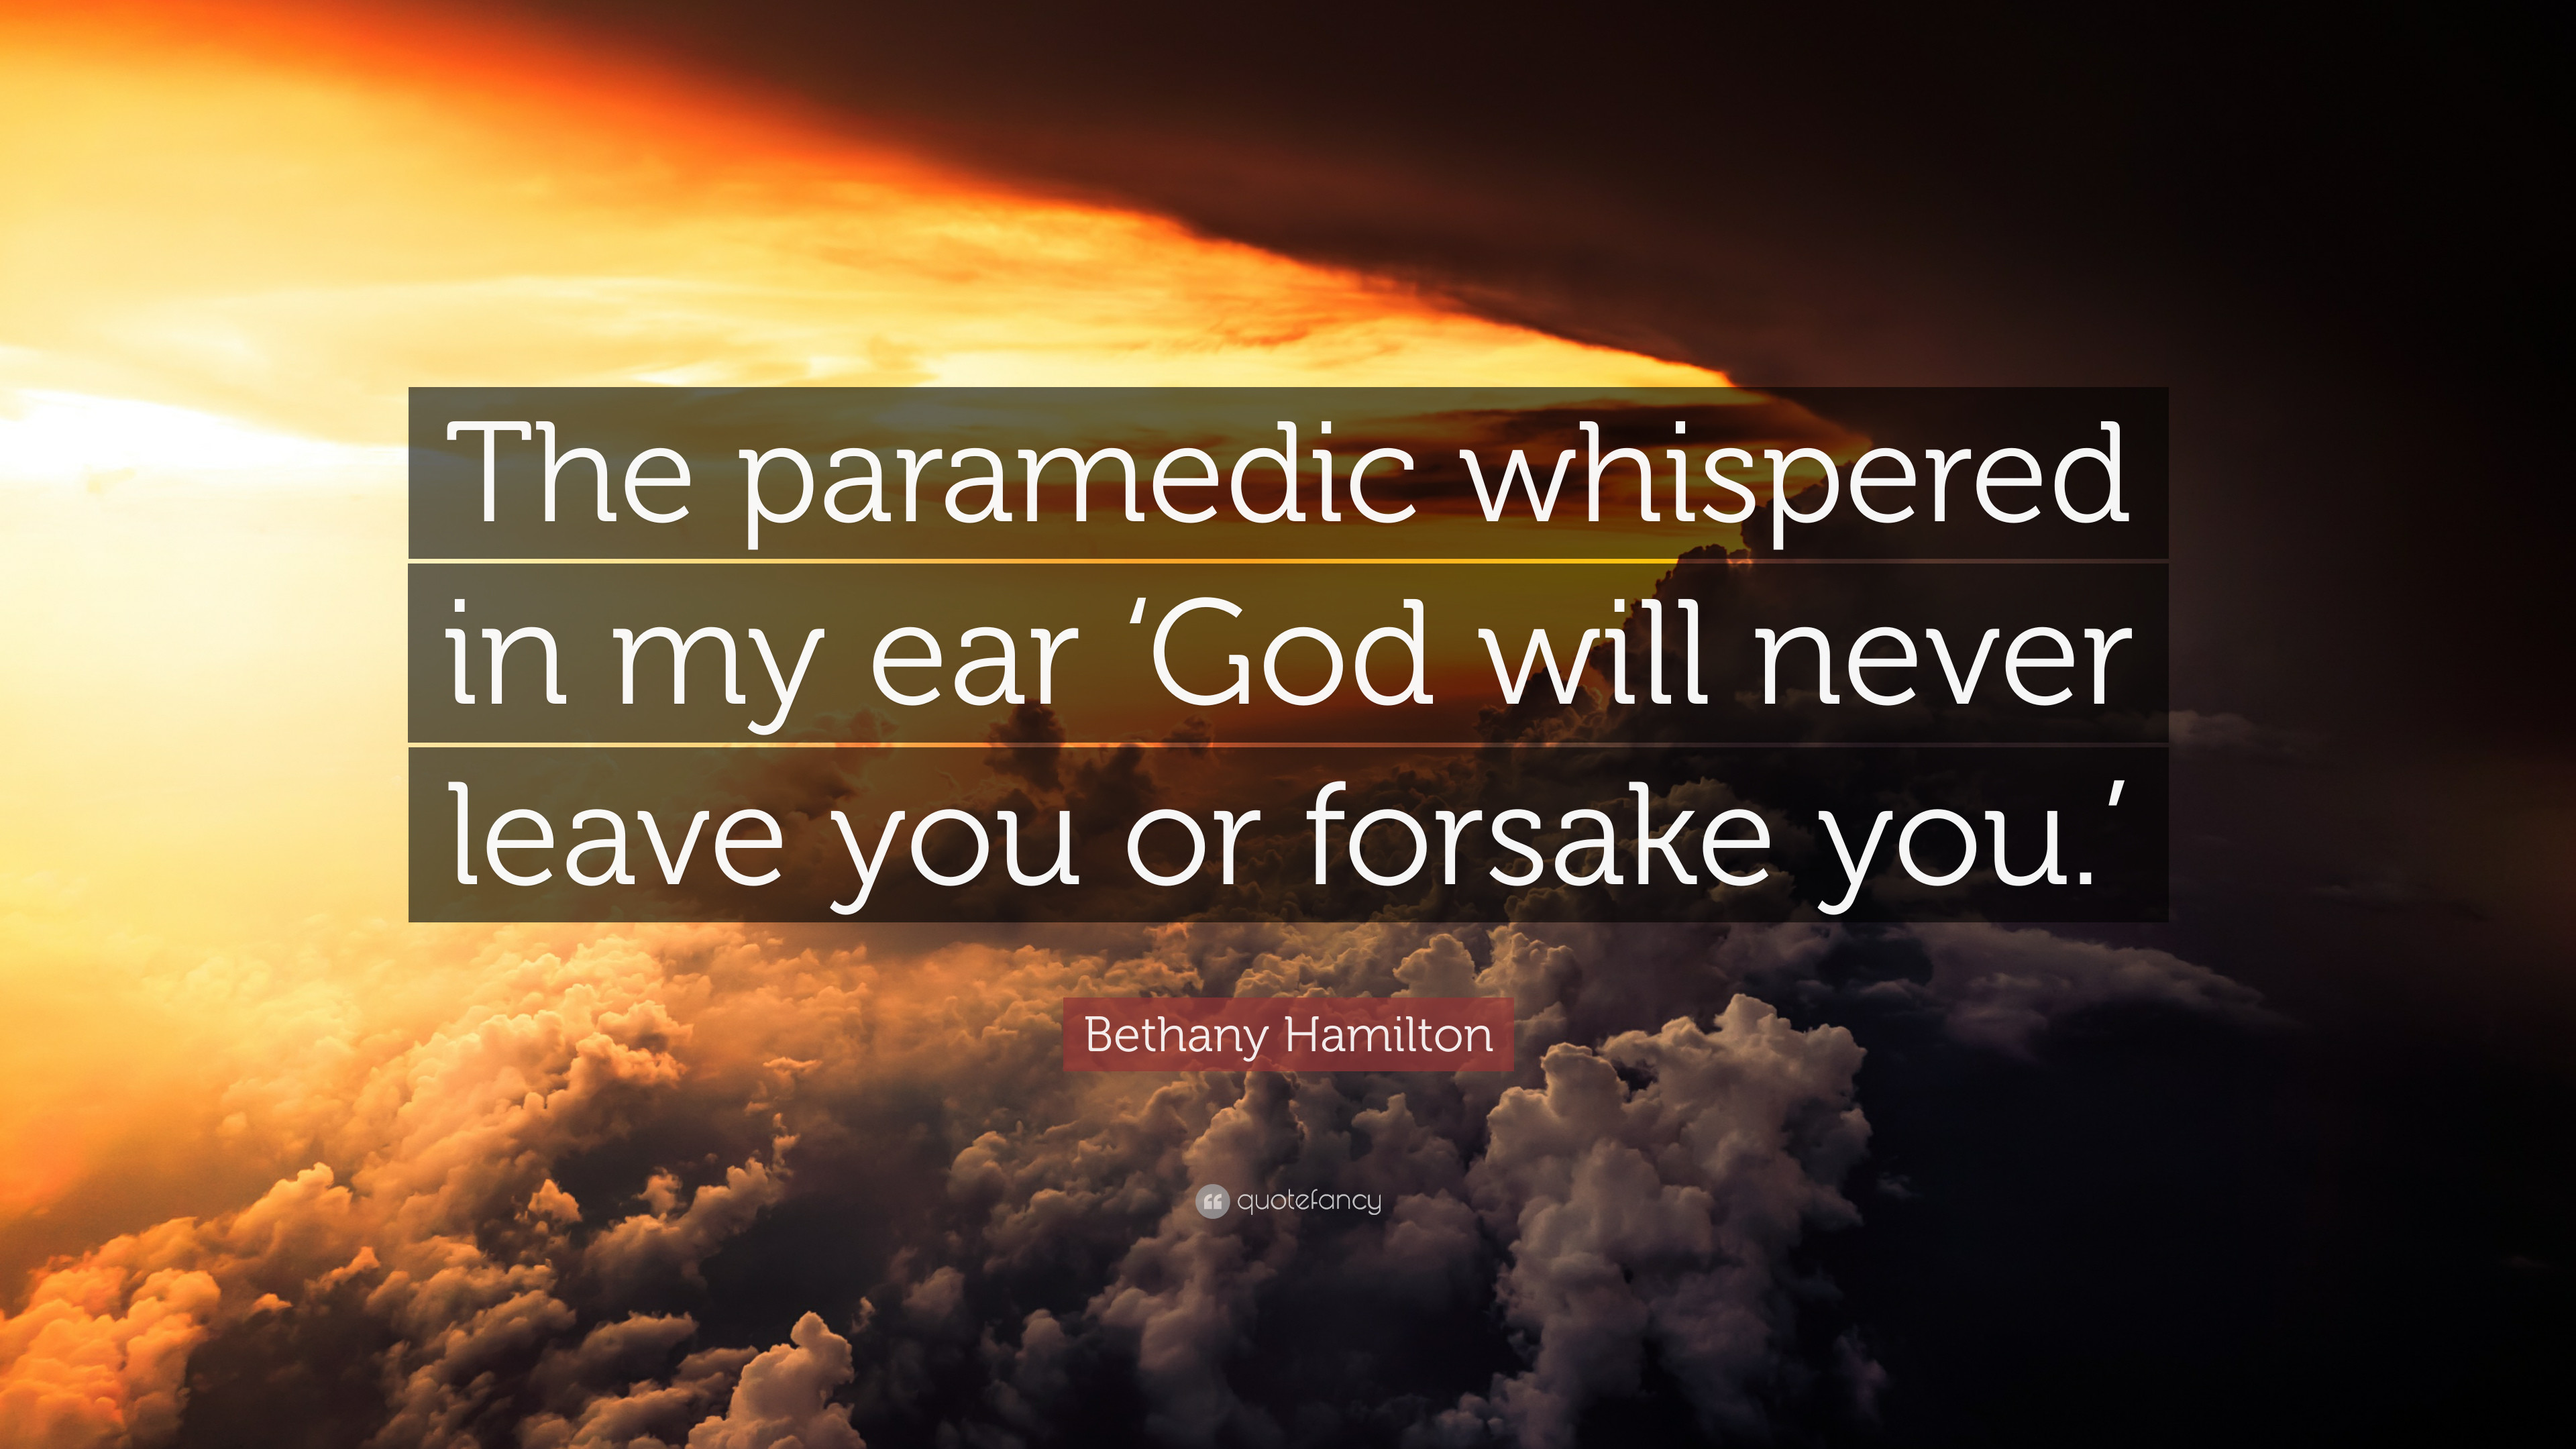 3840x2160 Bethany Hamilton Quote: “The paramedic whispered in my ear 'God will never  leave